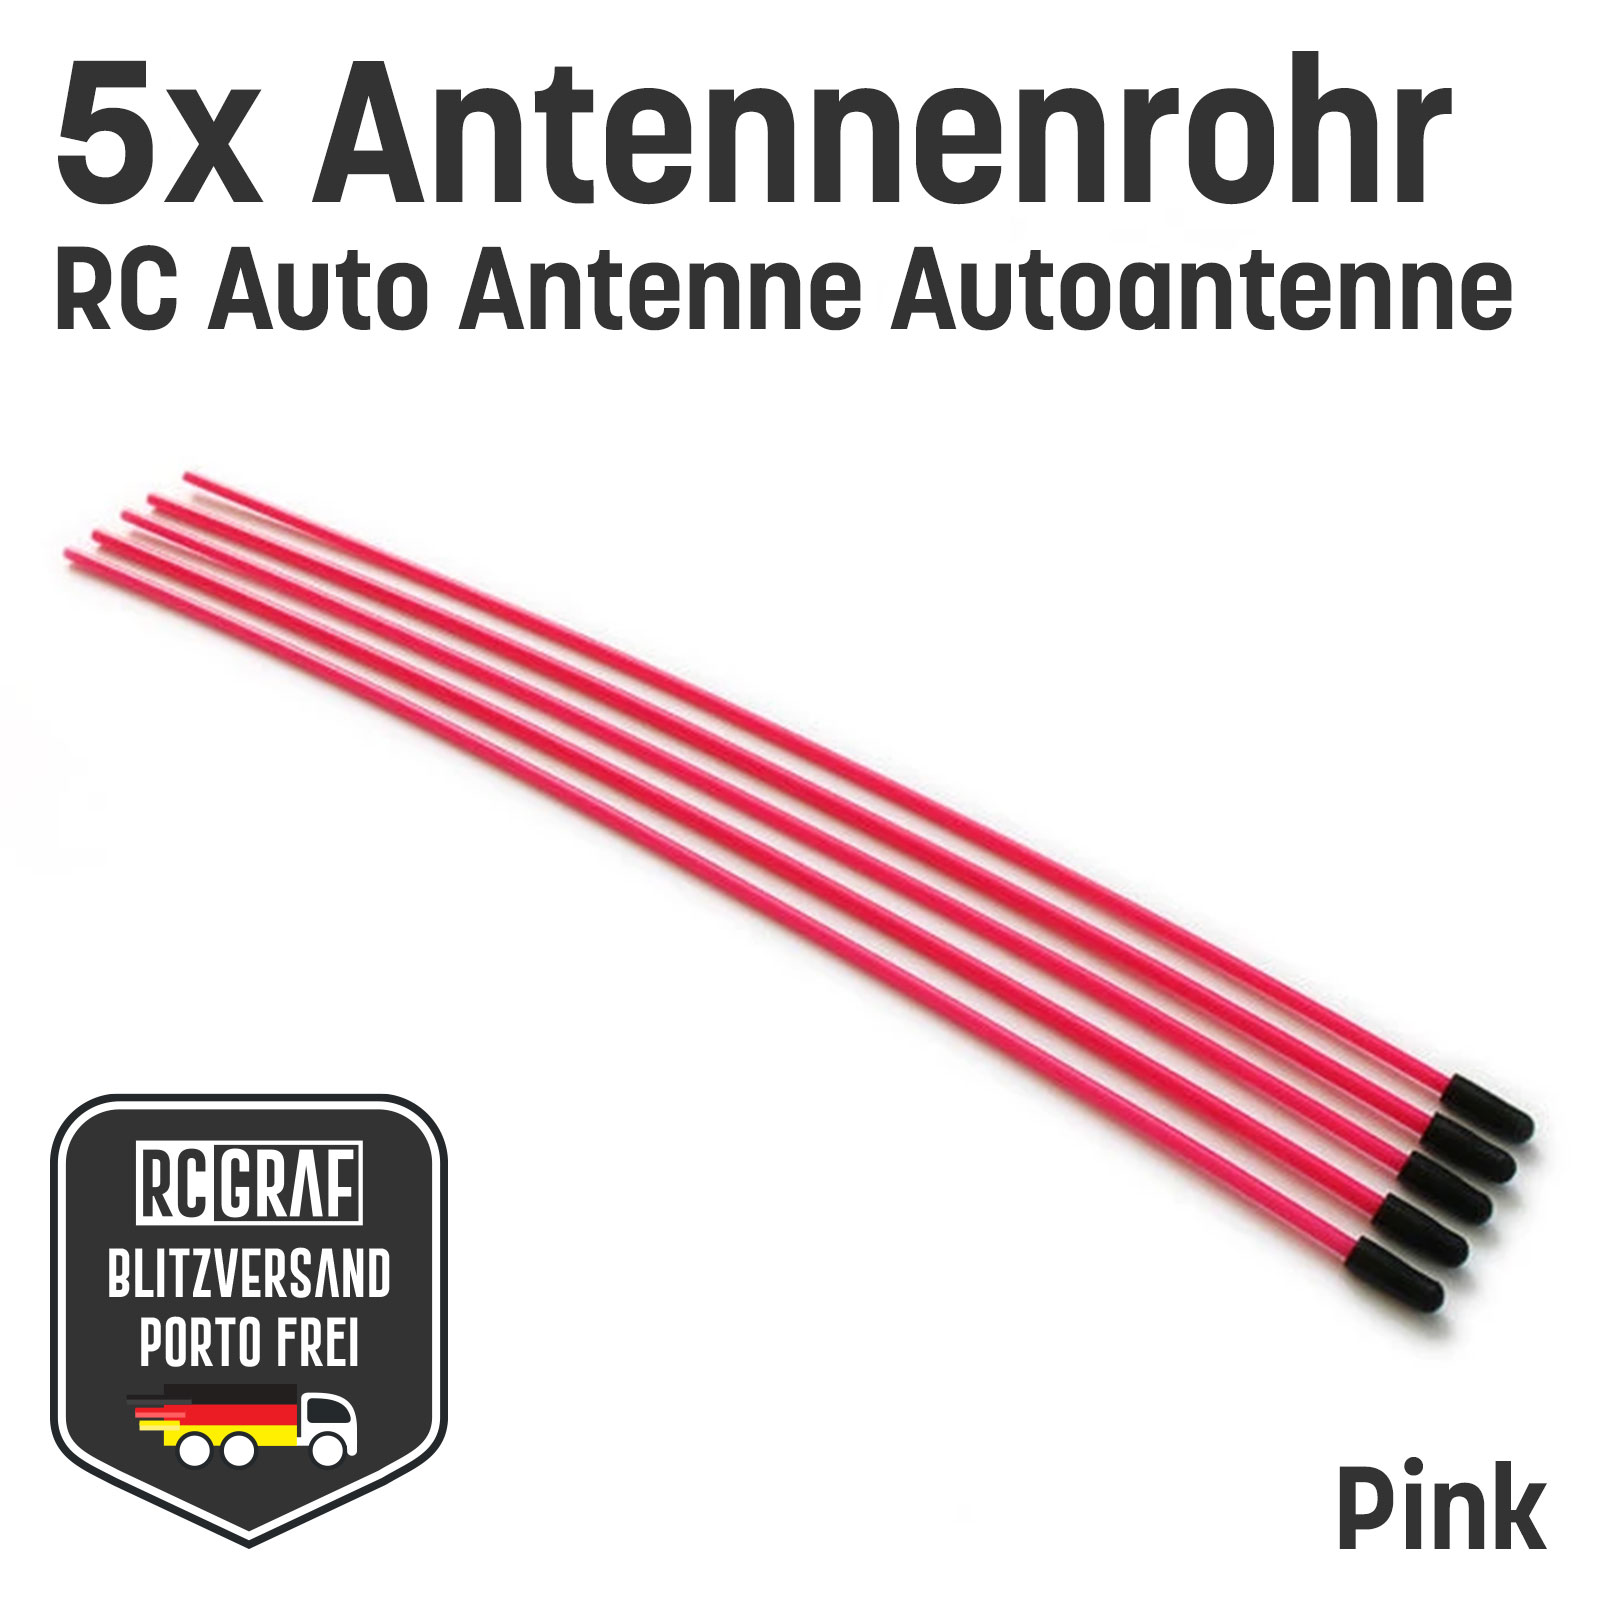 5x RC Antennenrohr Pink